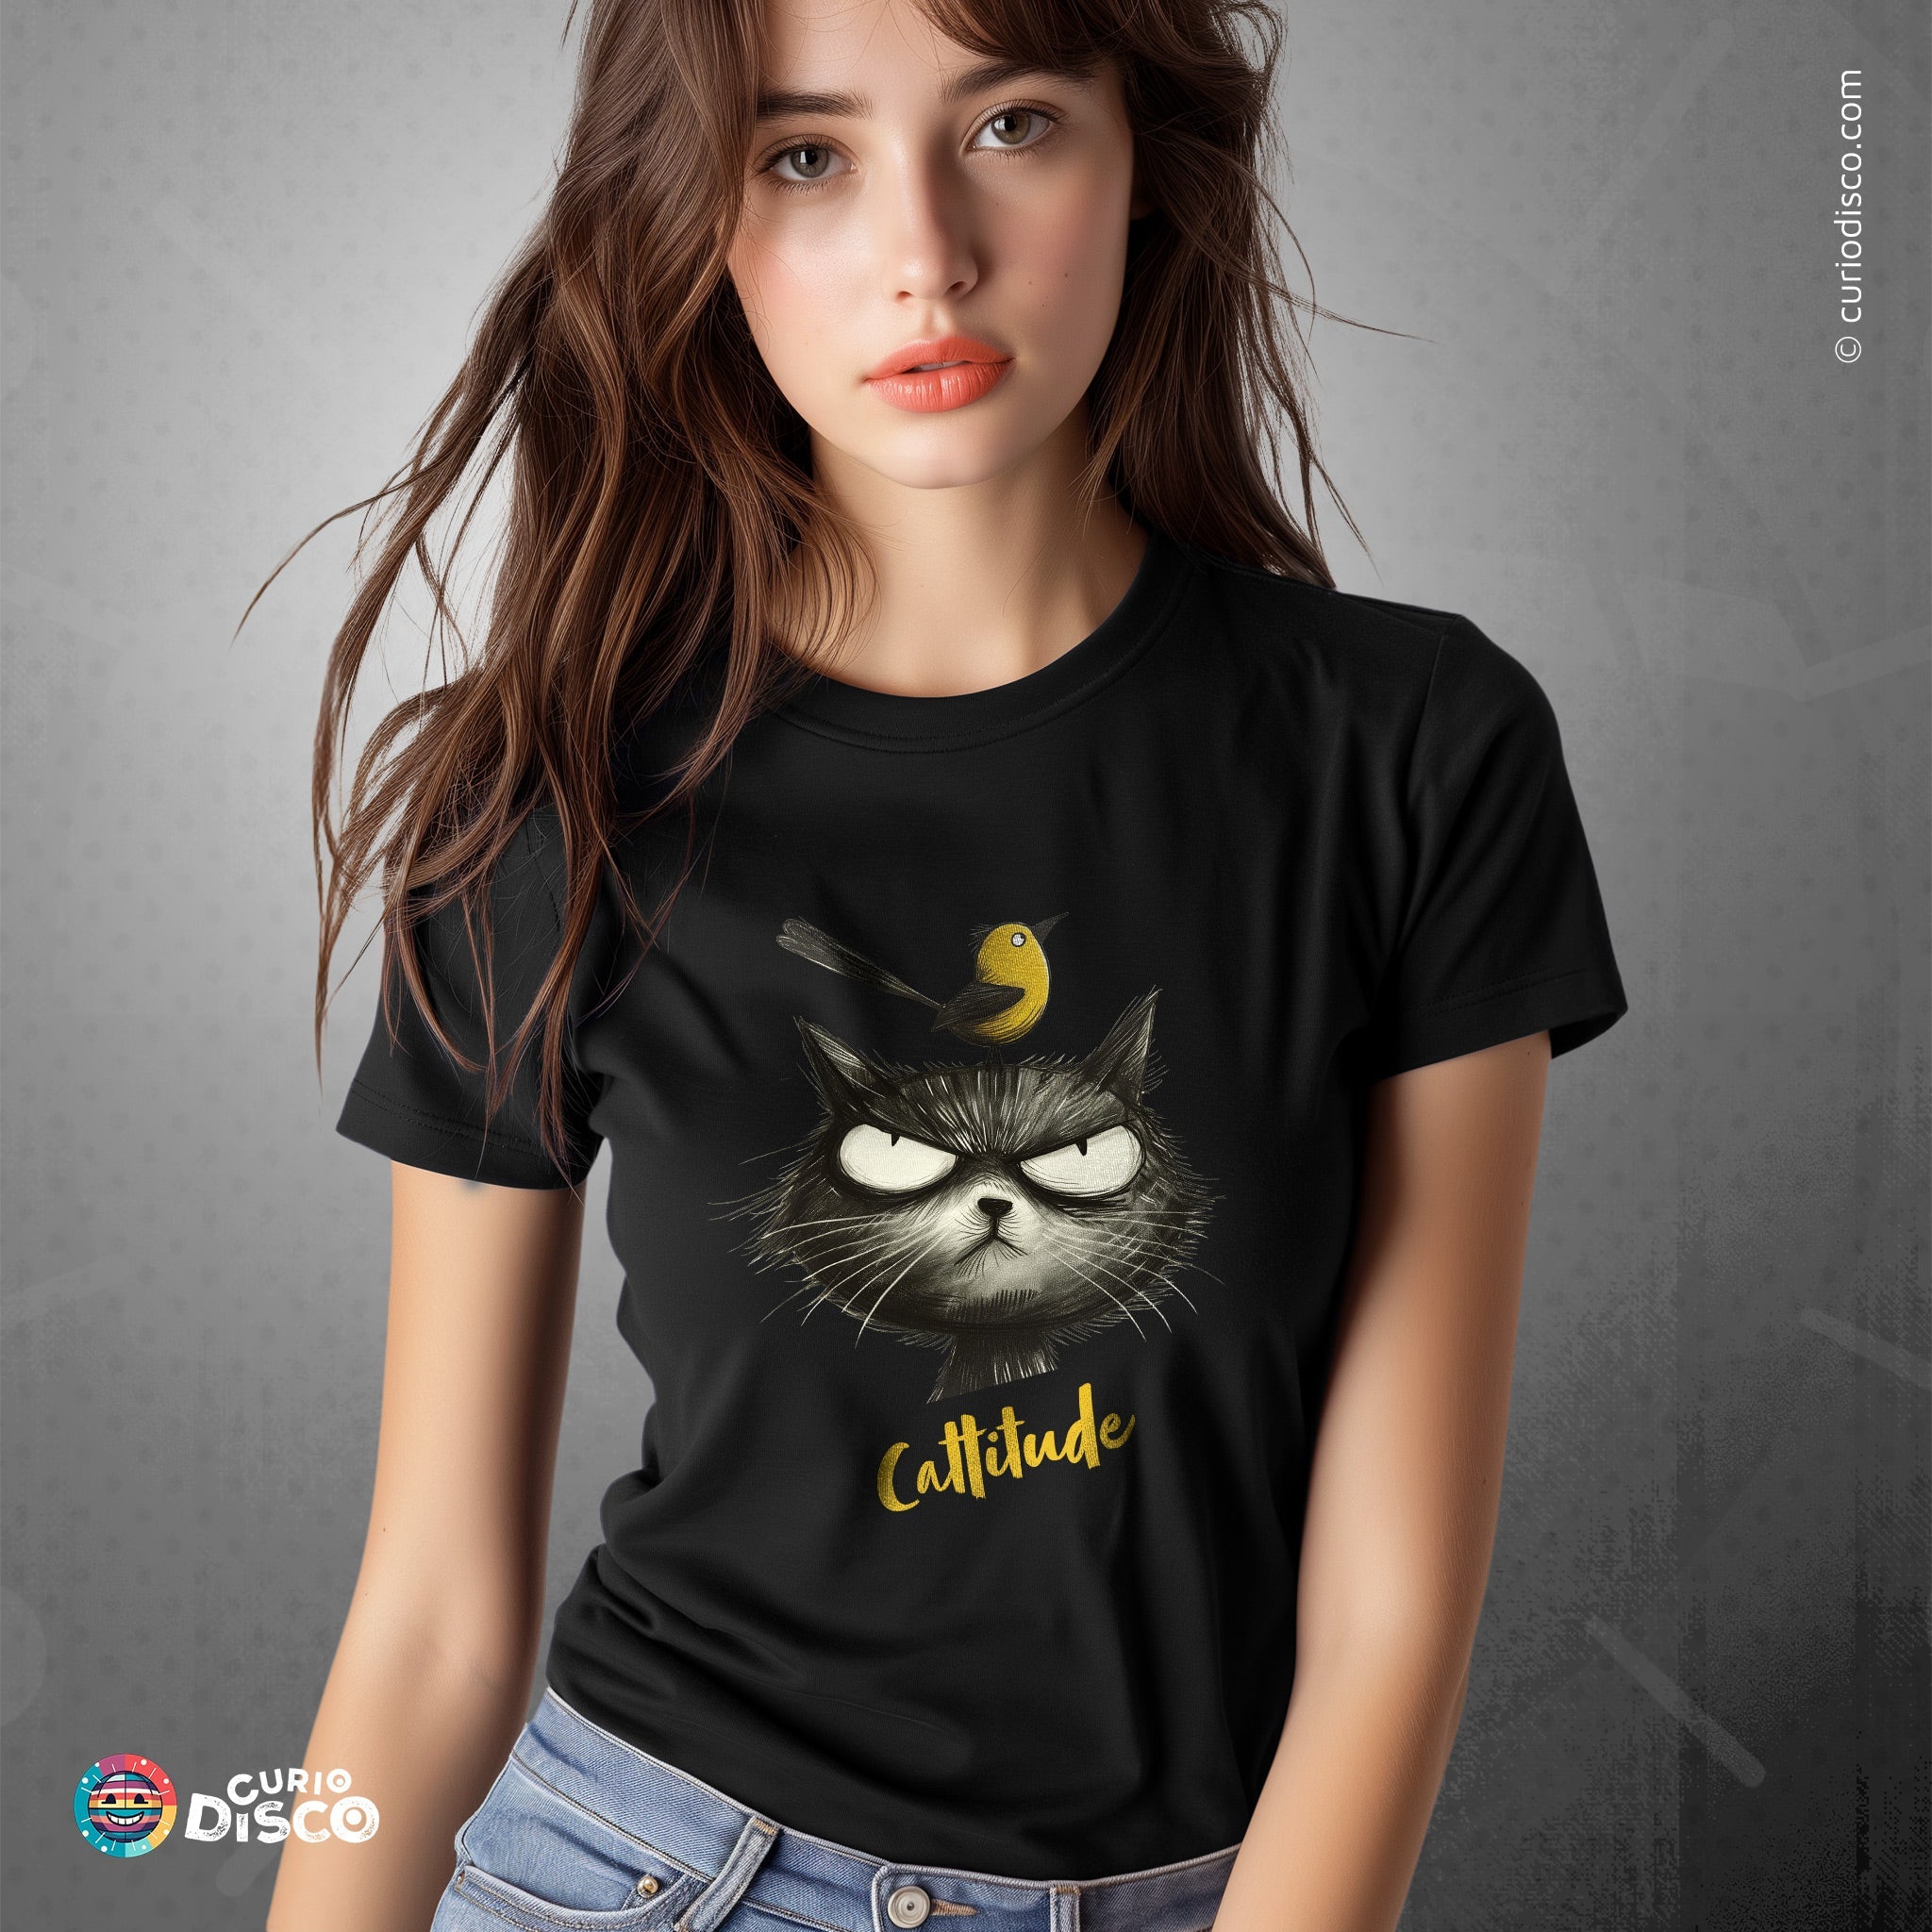 Black, short sleeve t-shirt, a funny cat shirt and ironic shirt blend, great as gifts for girlfriend, cat lover gift, and meme shirt. Cat yoga, treat yourself, gifts for cat lovers and cat people. Custom pet shirt in plus size.